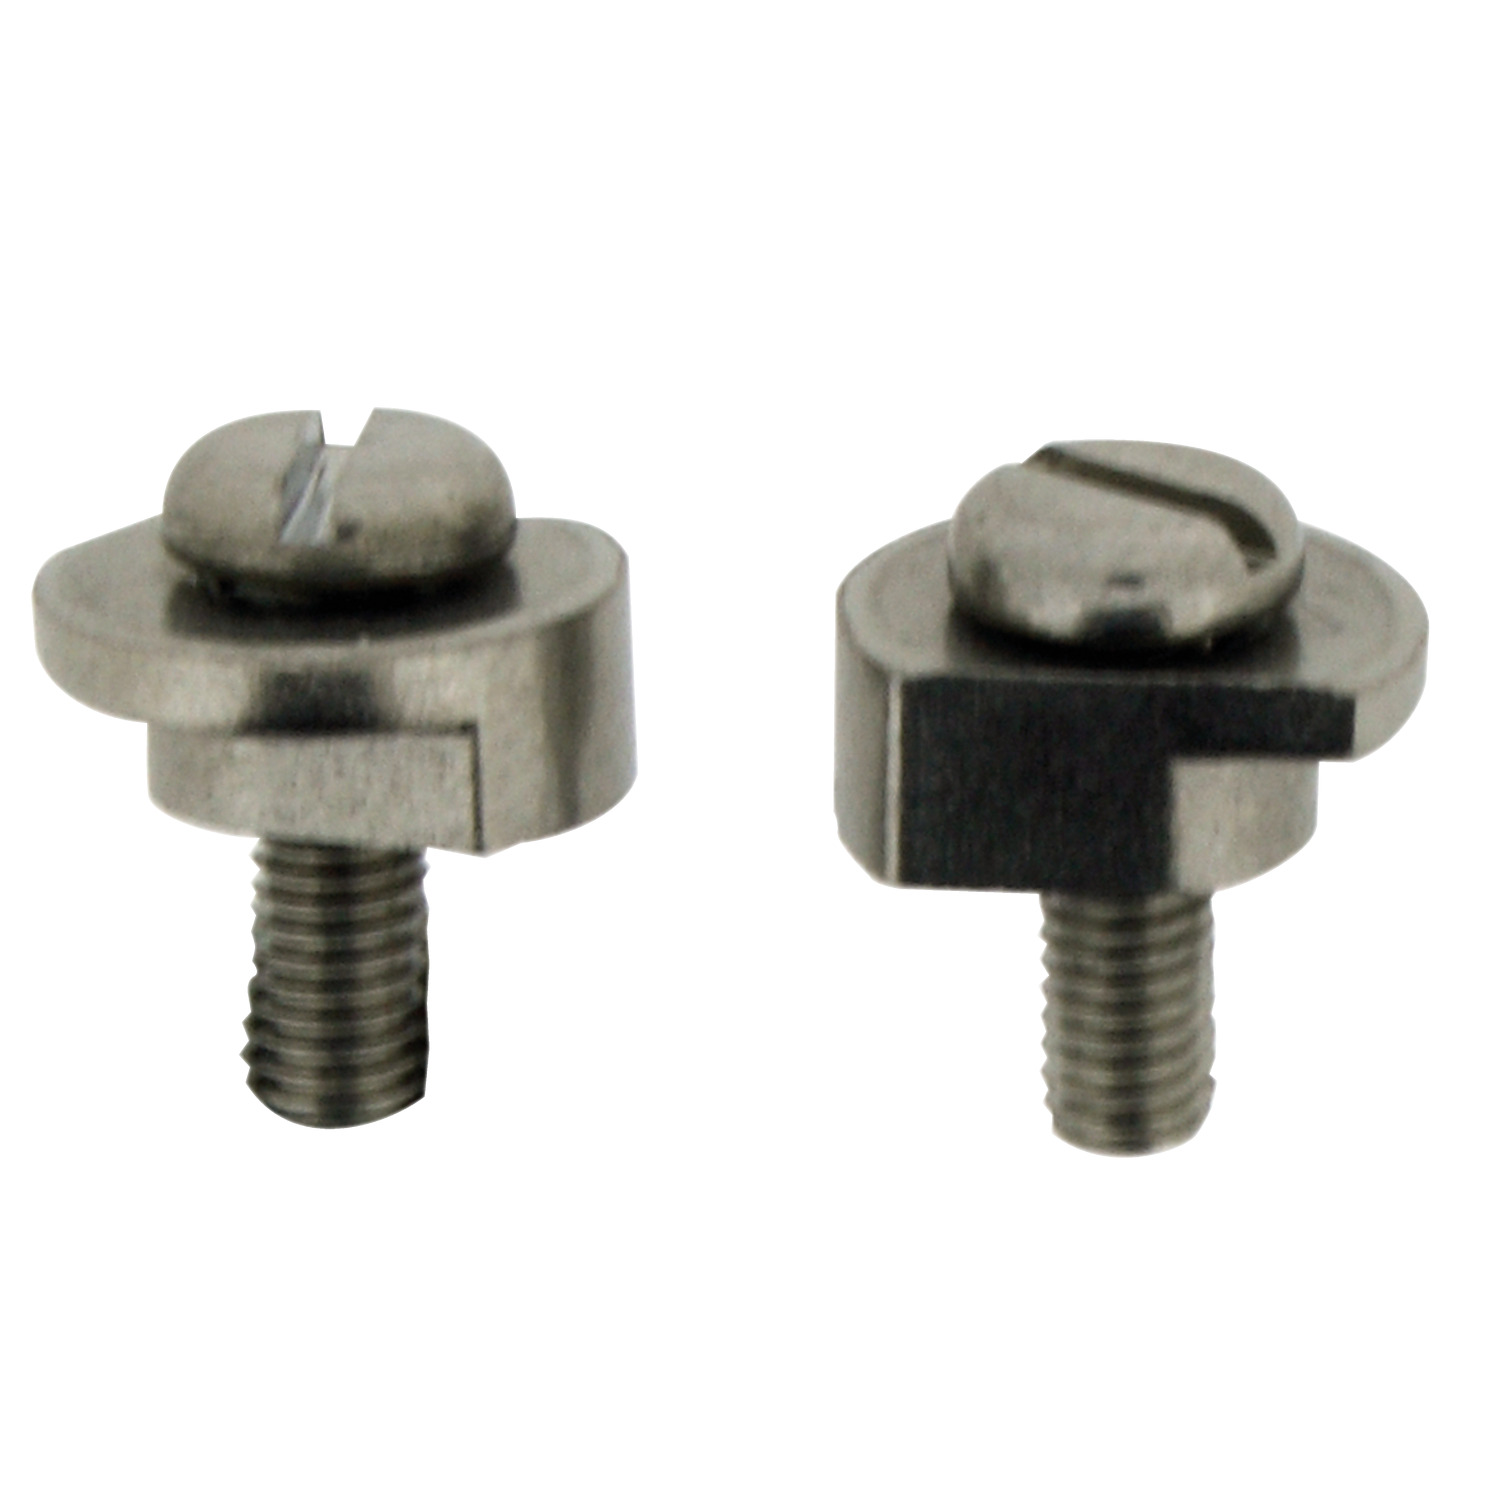 P0292 - Clamp Cleats